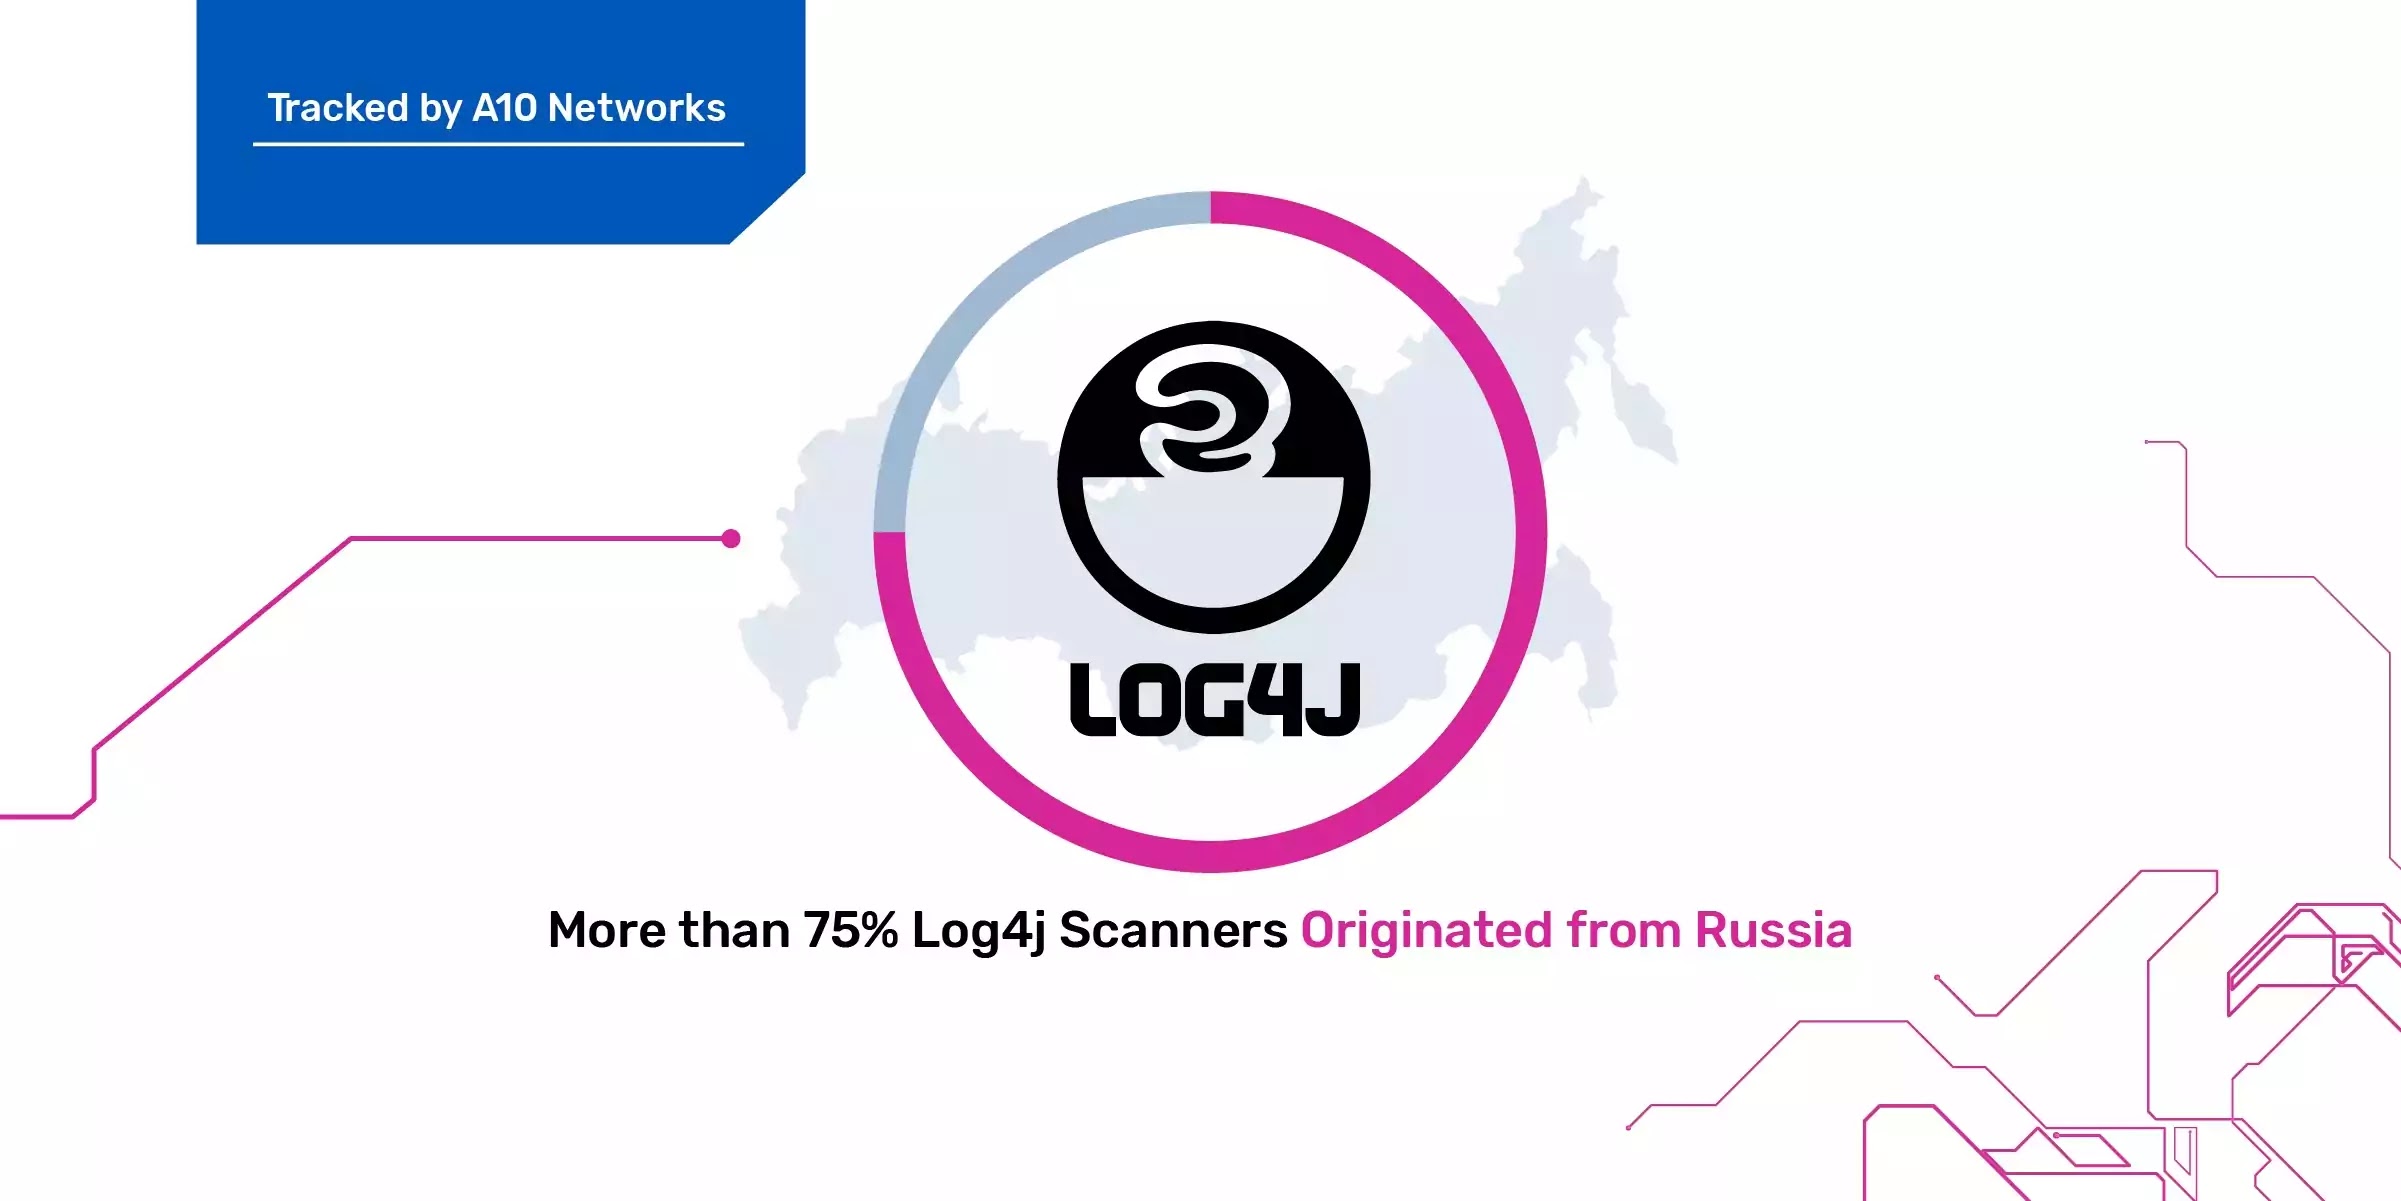 More than 75 percent of Log4j scanners originated in Russia